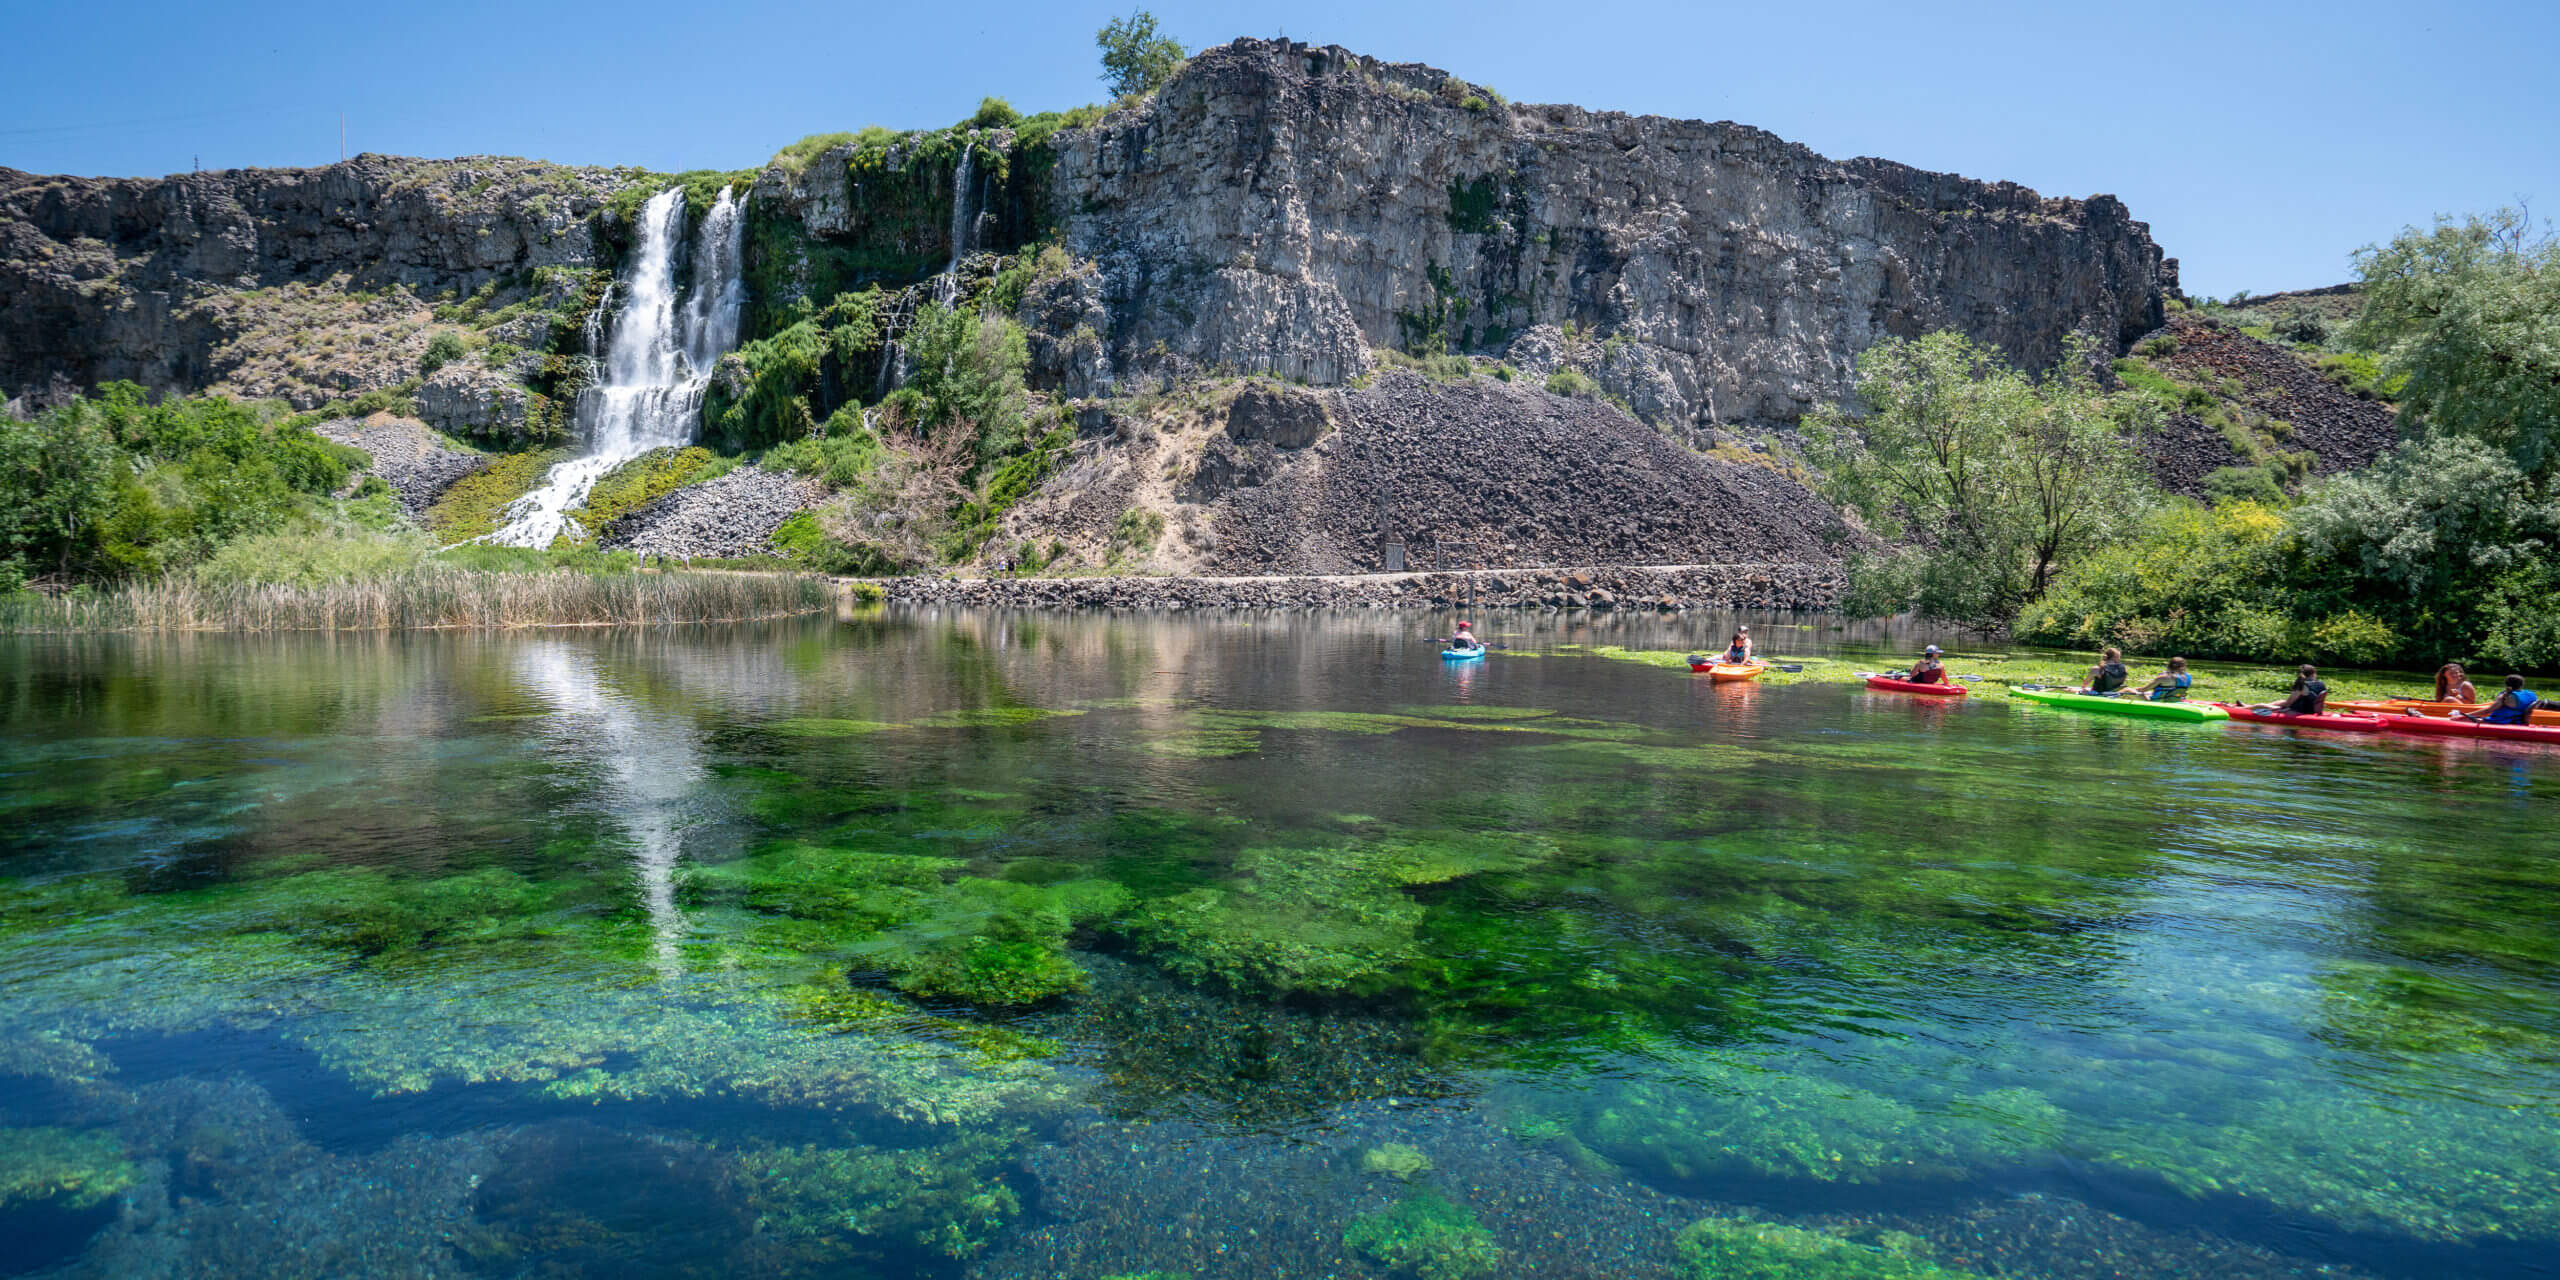 A group of kayakers in a row enjoying Blue Heart Springs.